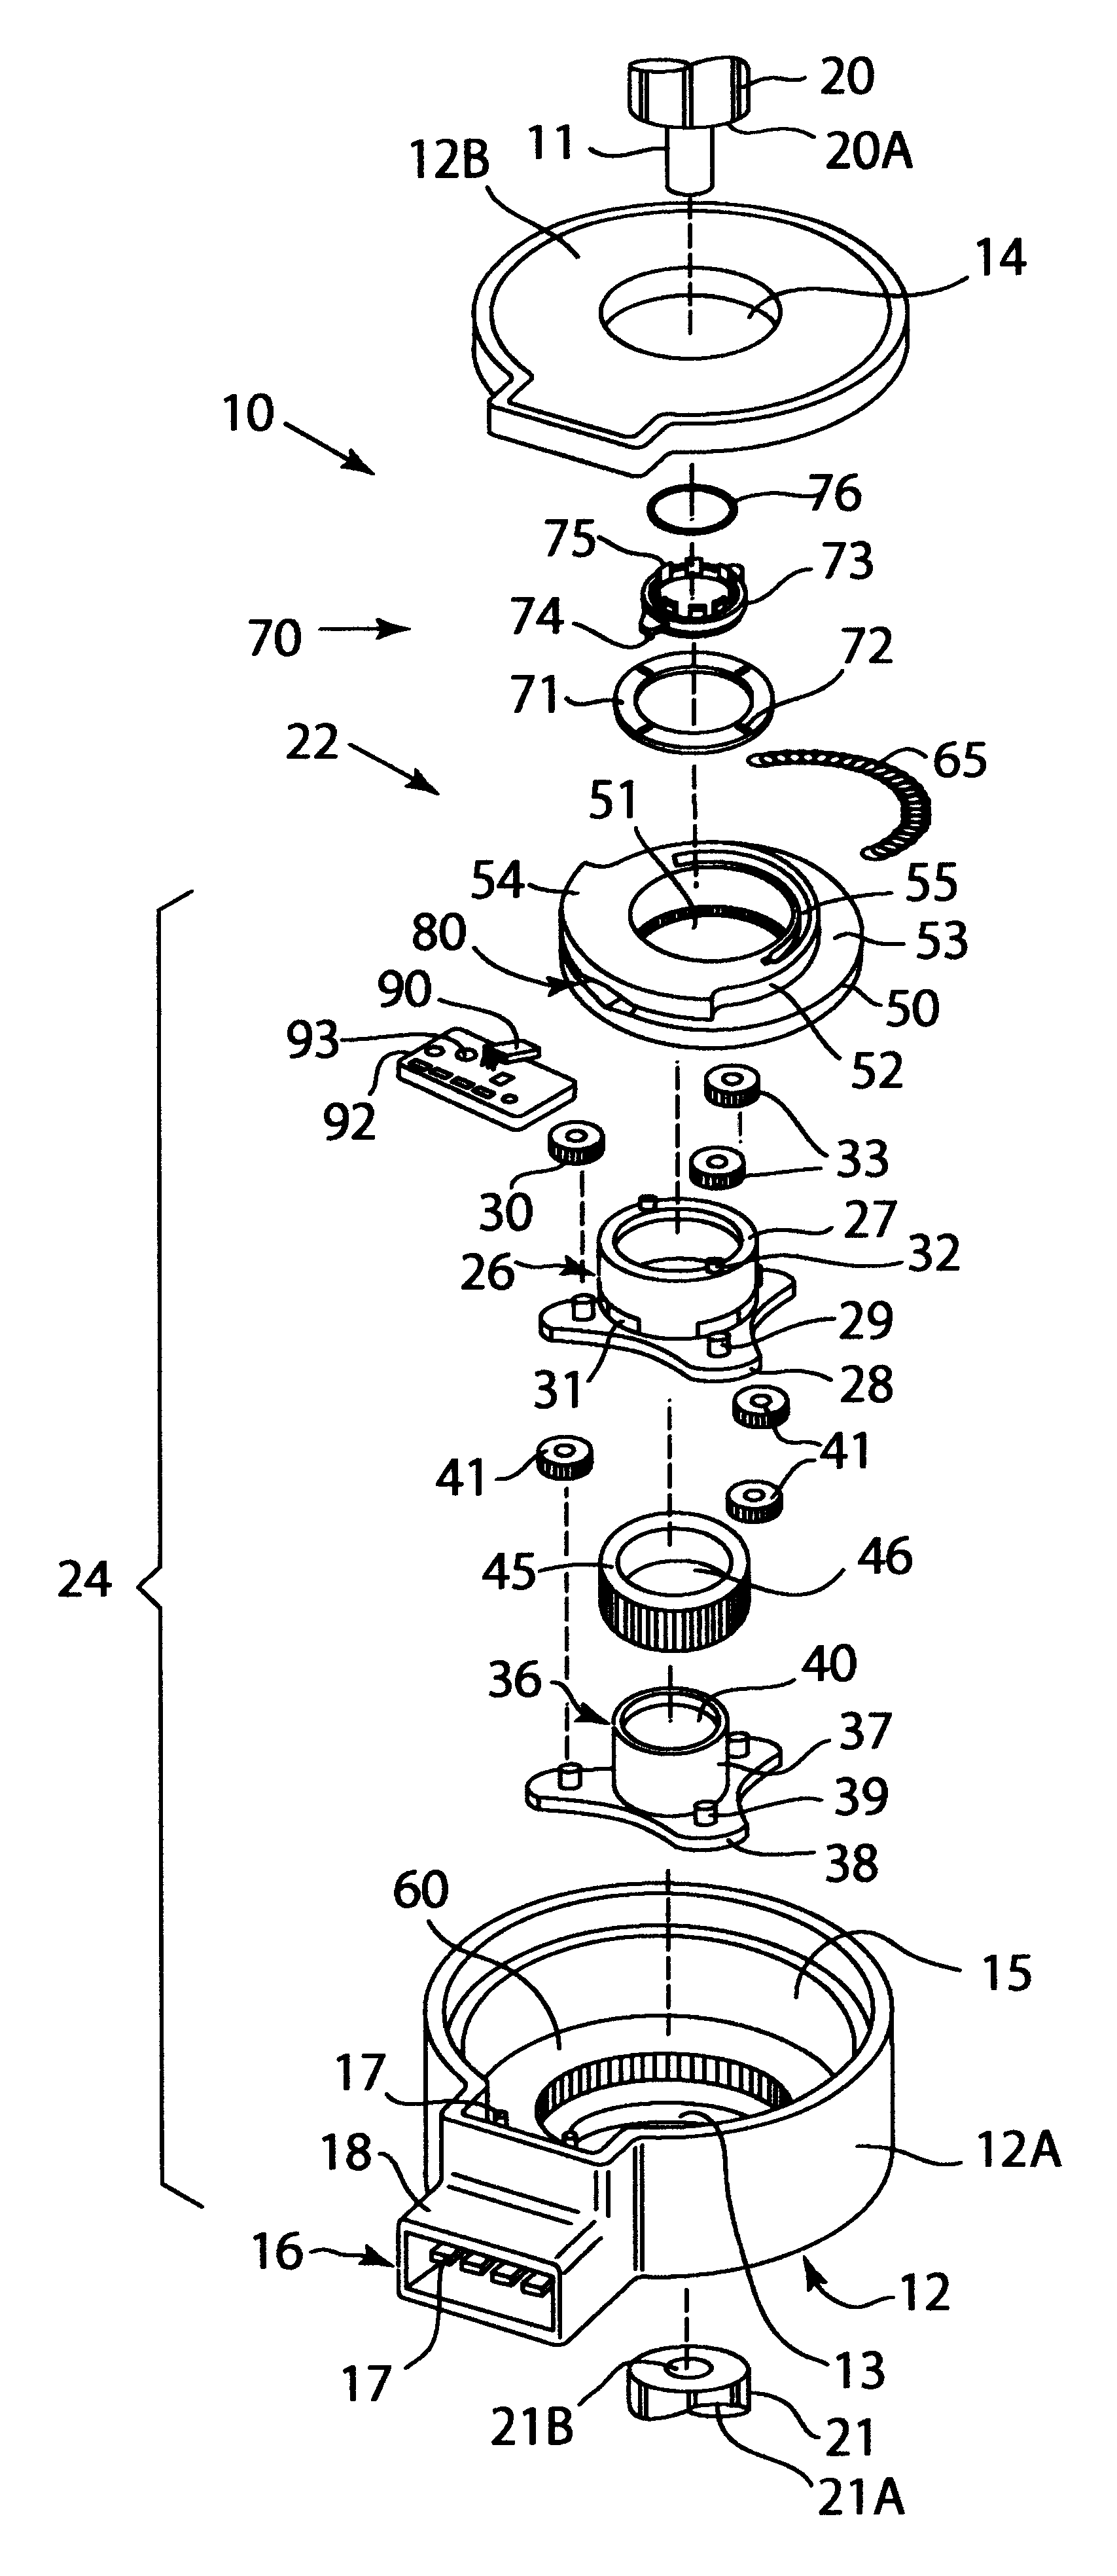 Non-contacting sensor for measuring relative displacement between two rotating shafts